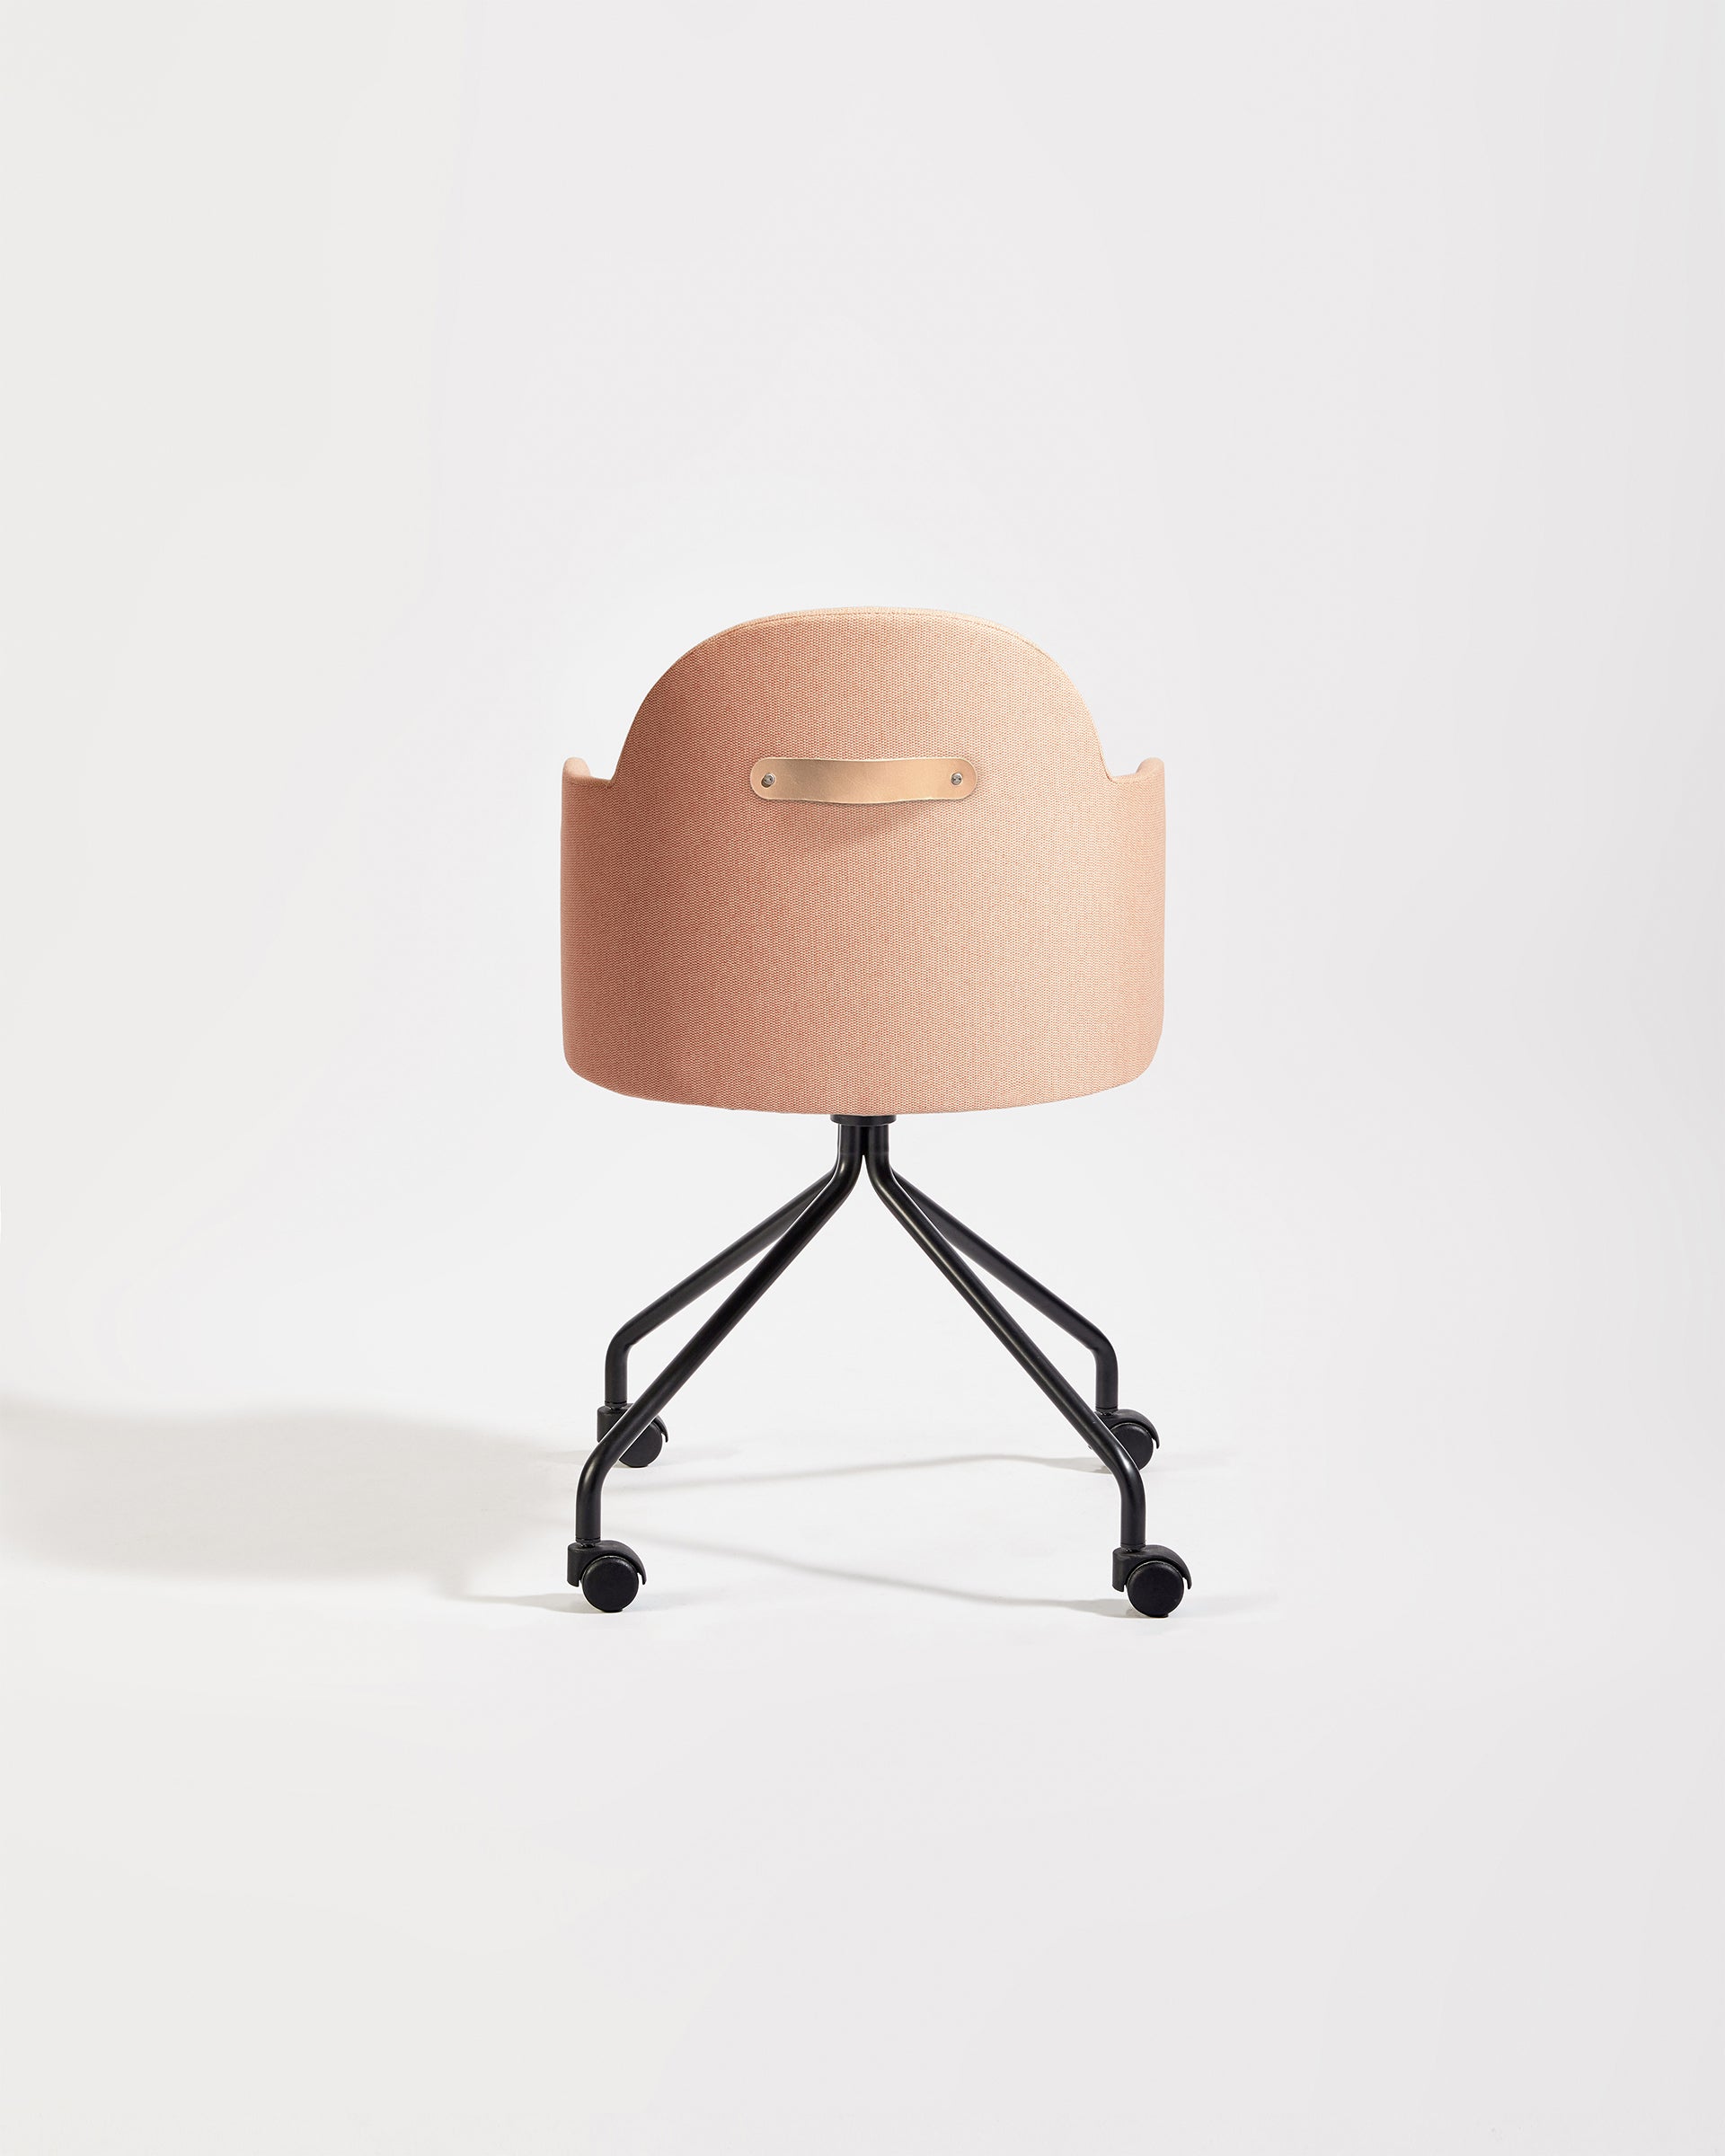 Potato Armchair Swivel with Castors Black Base | Office or Dining Tub Chair with Handle | Gibson Karlo | DesignByThem ** HF2 Messenger - 097 Krill